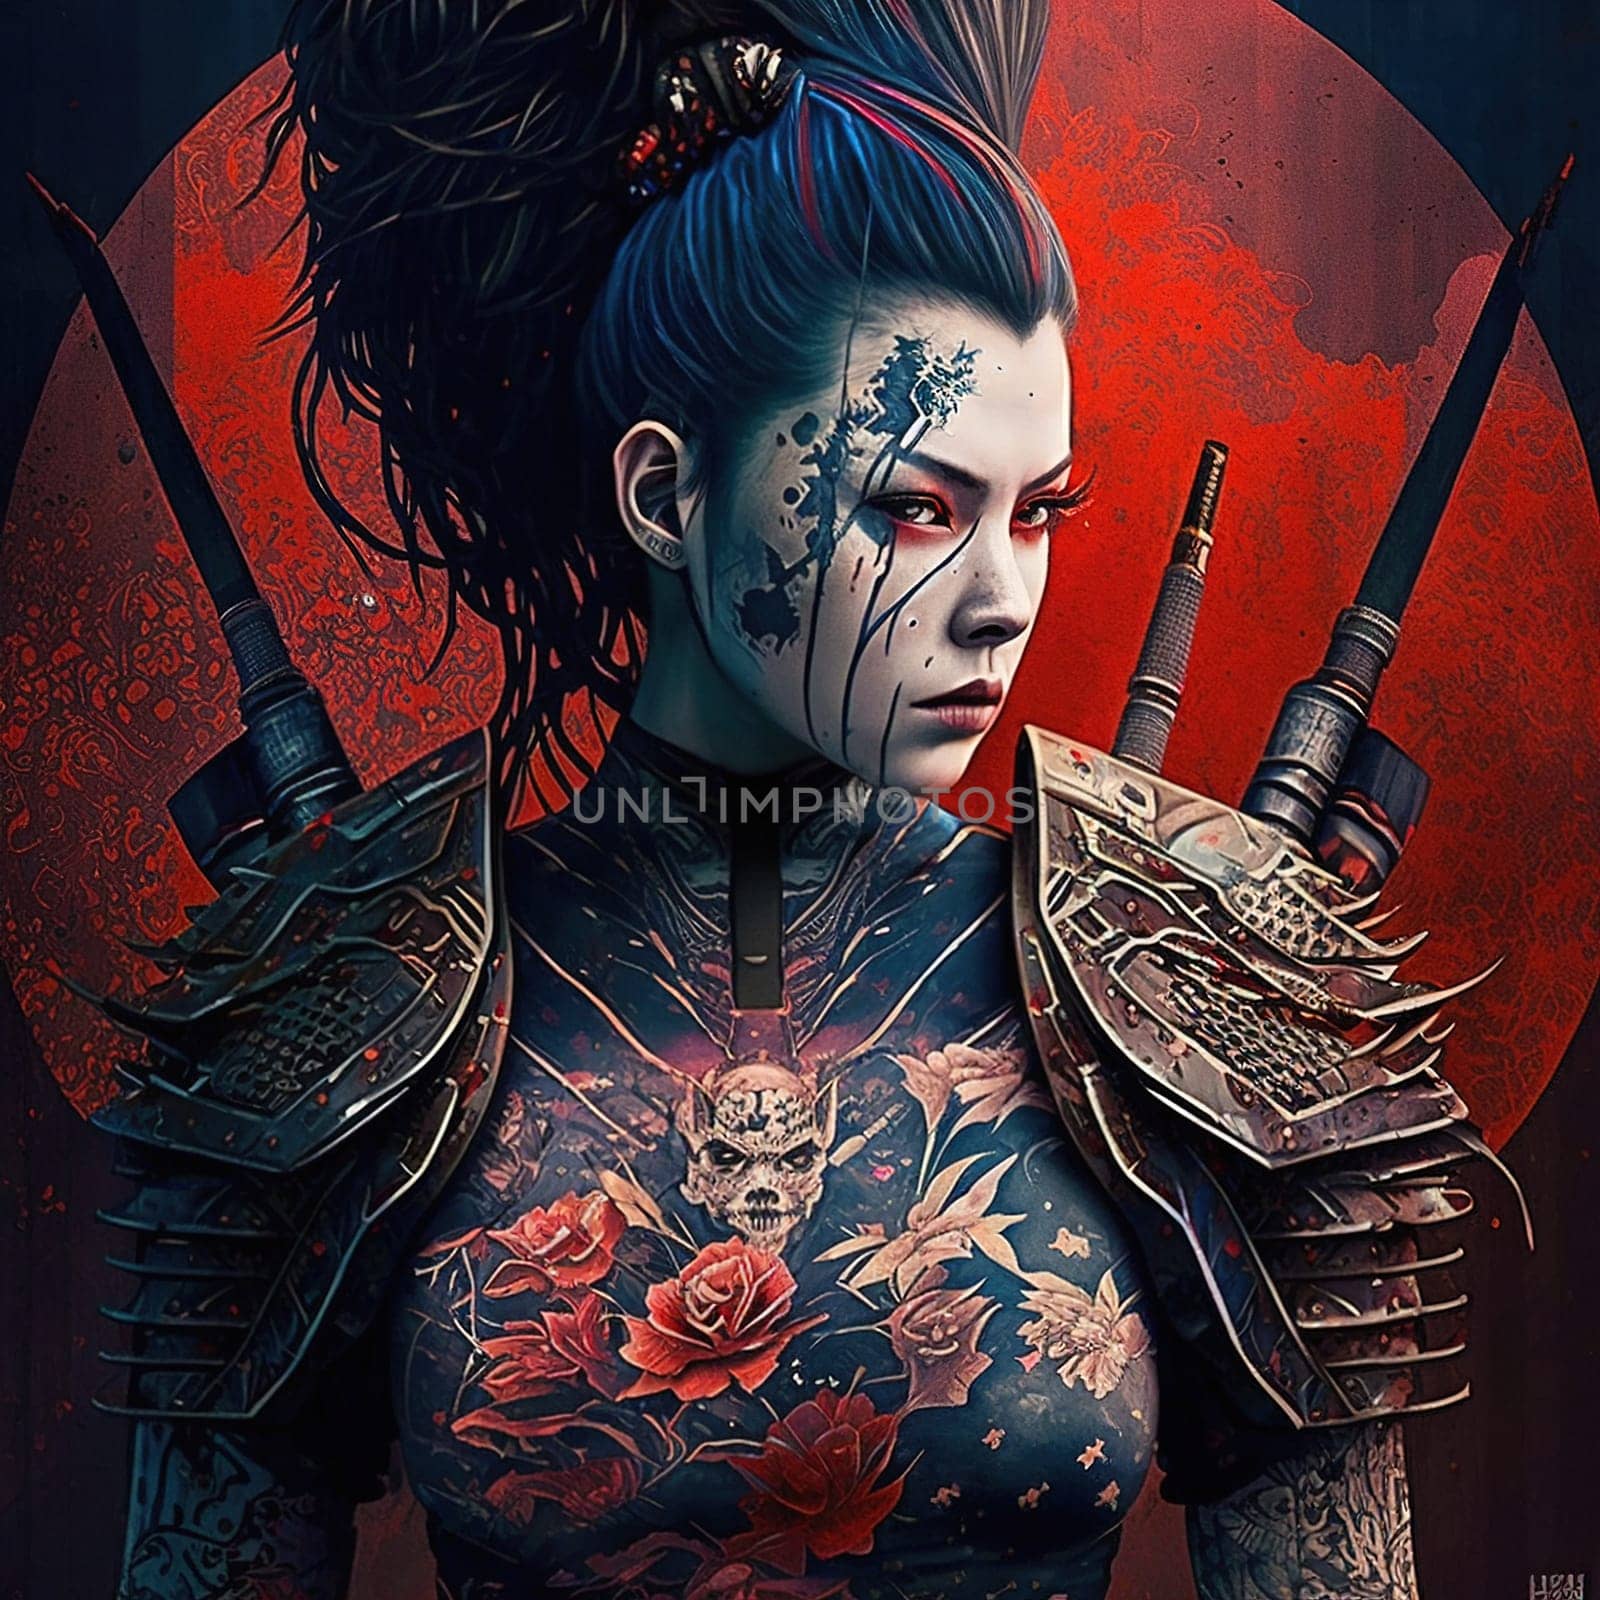 Captivating Cyberpunk Japanese Woman Adorned in Full Yakuza Bodysuit Tattoo with a Samurai Sword Against a Vibrant Red Sky with Influences of Traditional Geisha Culture by igor010